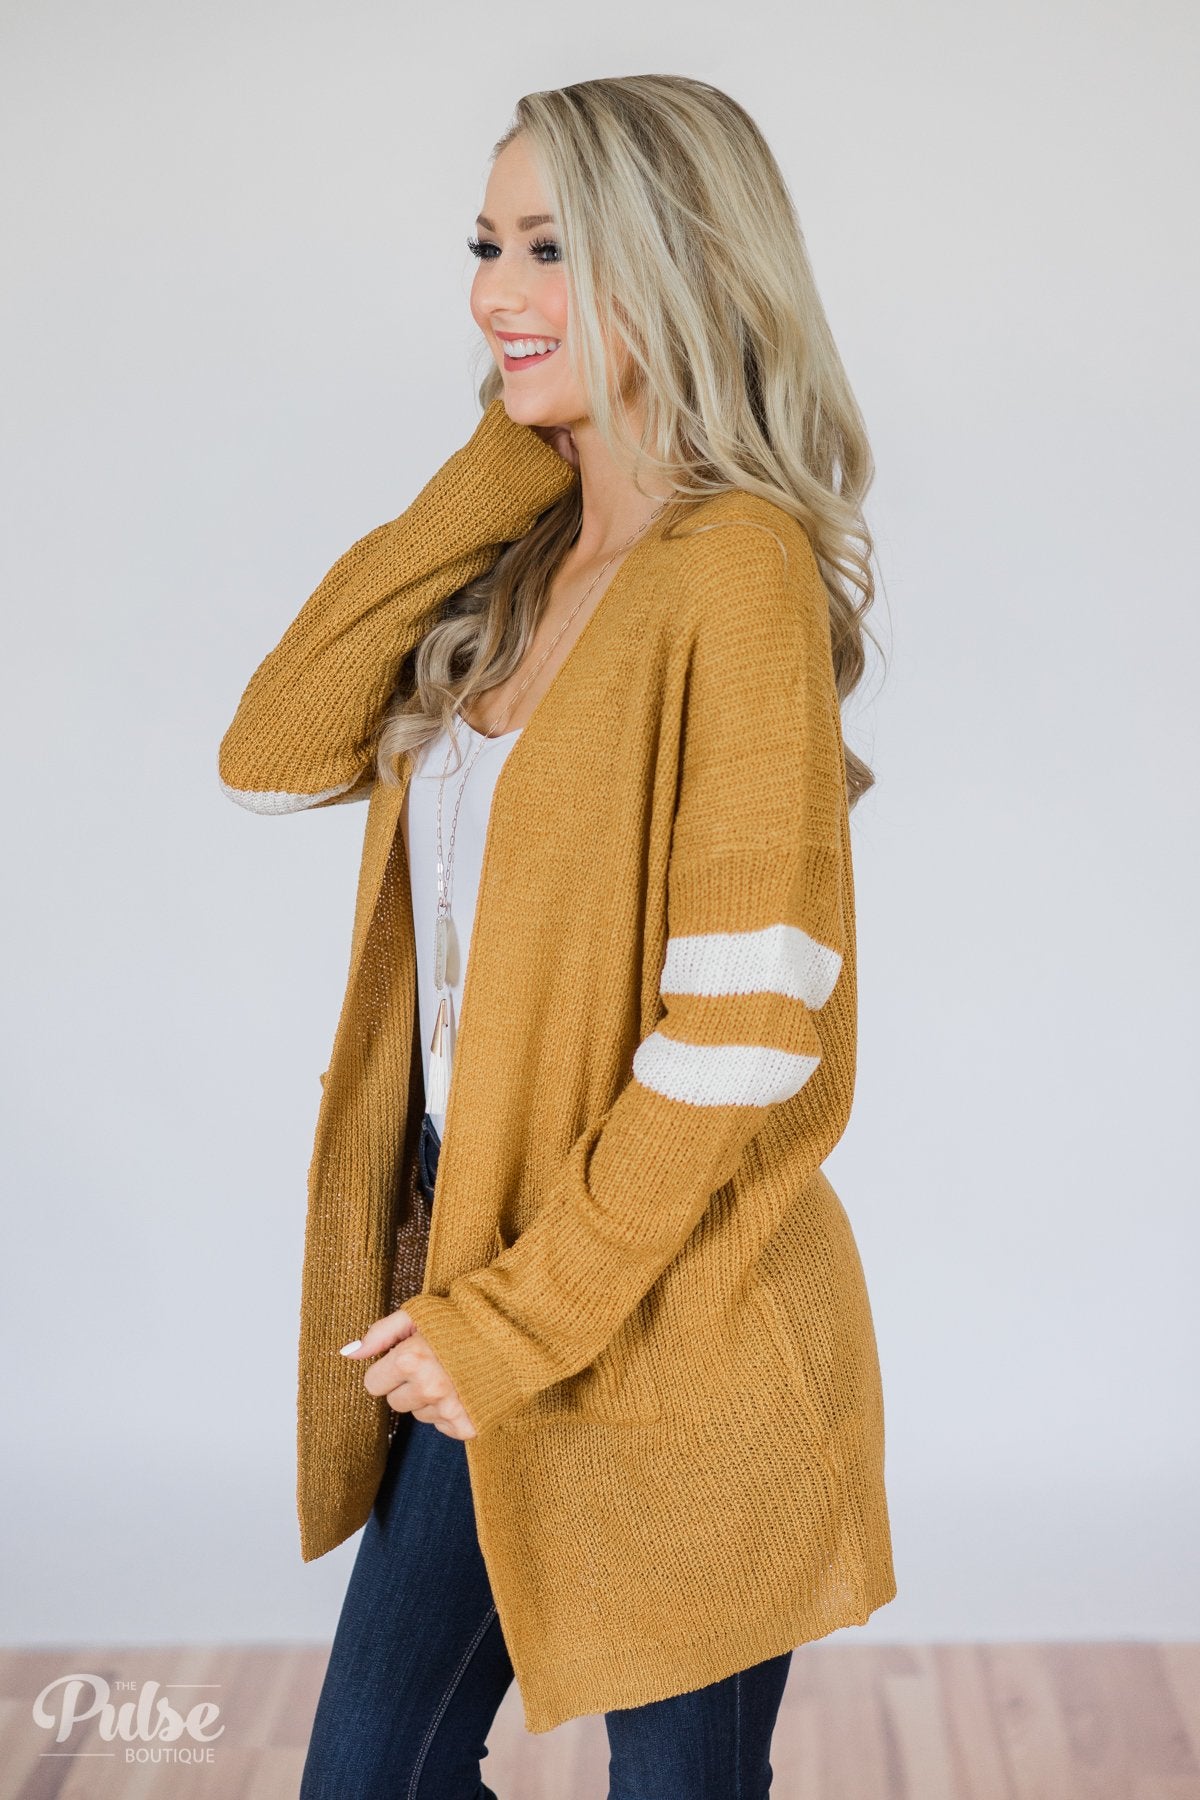 Varsity Stripe Knitted Cardigan- Golden Yellow – The Pulse Boutique